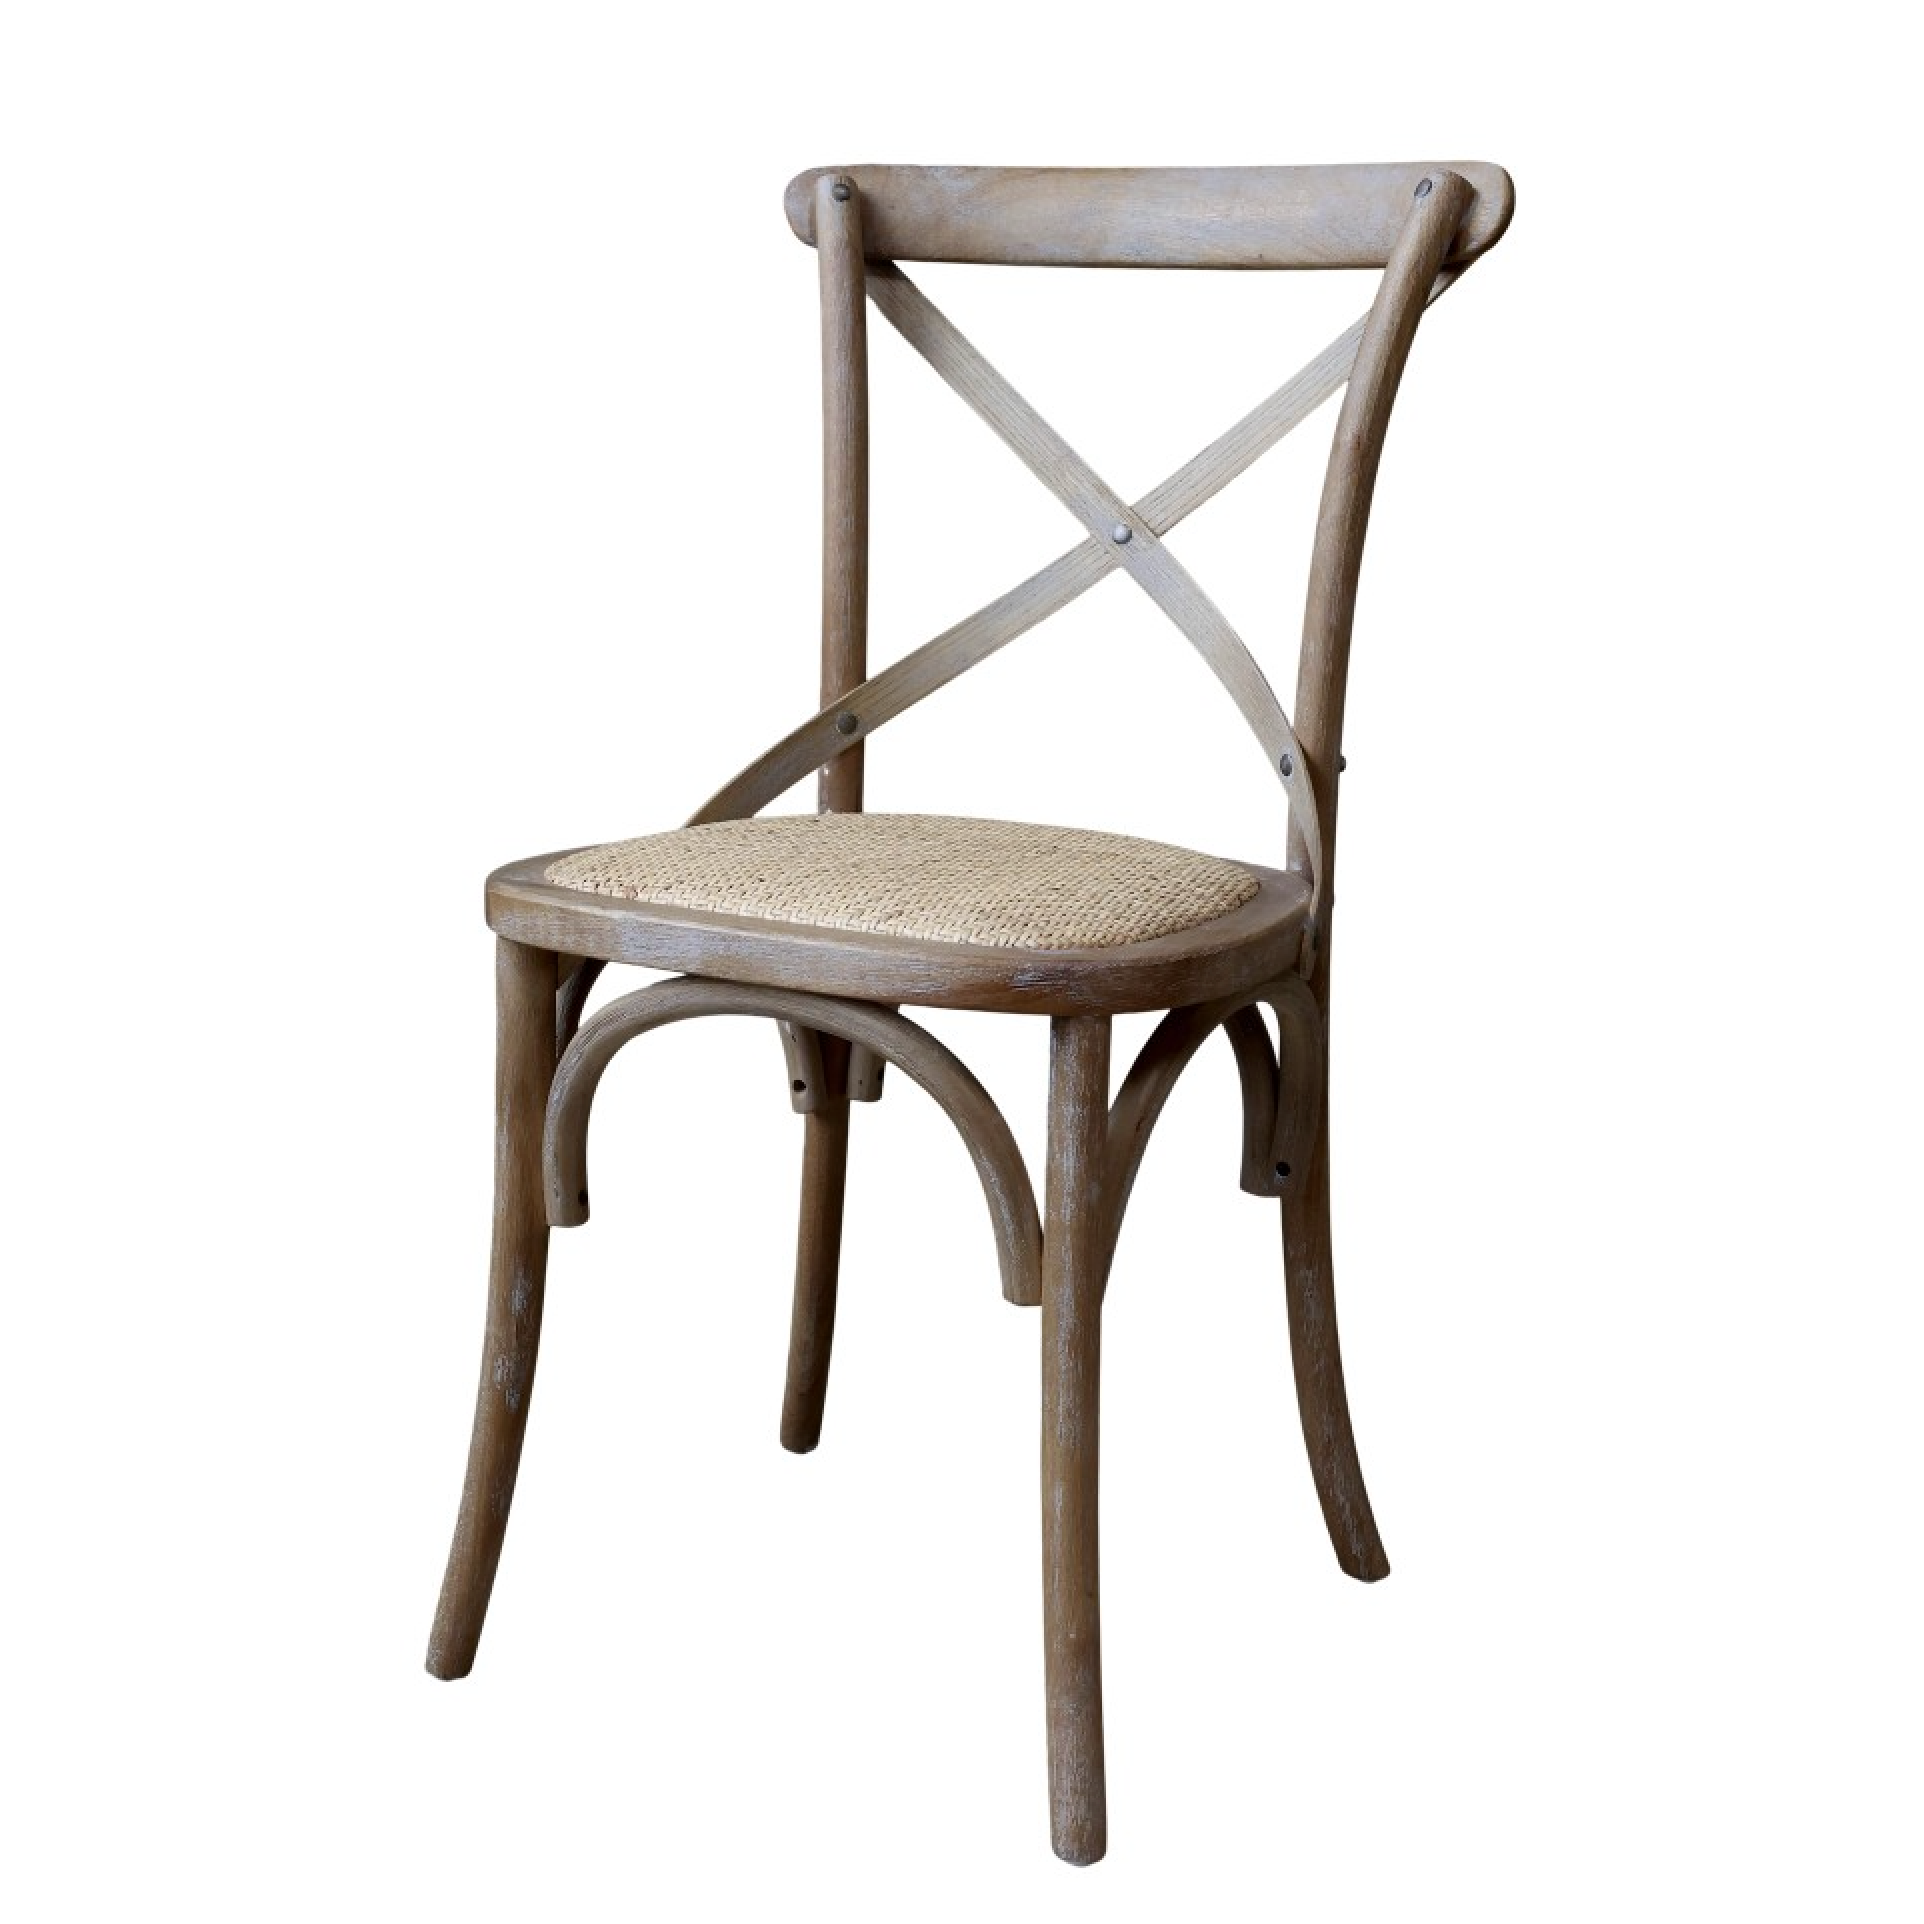 White washed wooden dining chair with wicker seat.